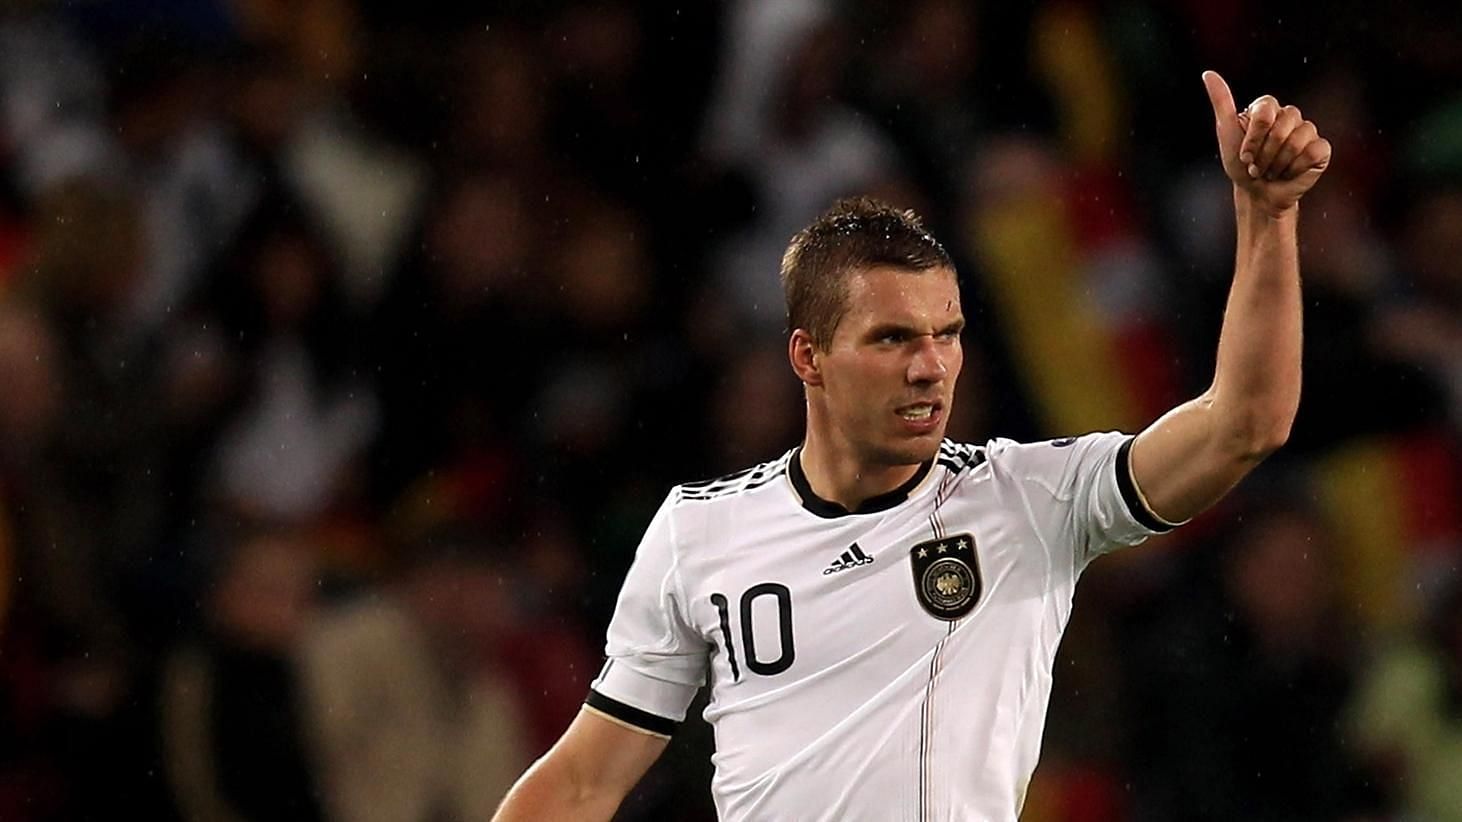 Lukas Podolski acknowledging a pass from a teammate during a game for Germany.